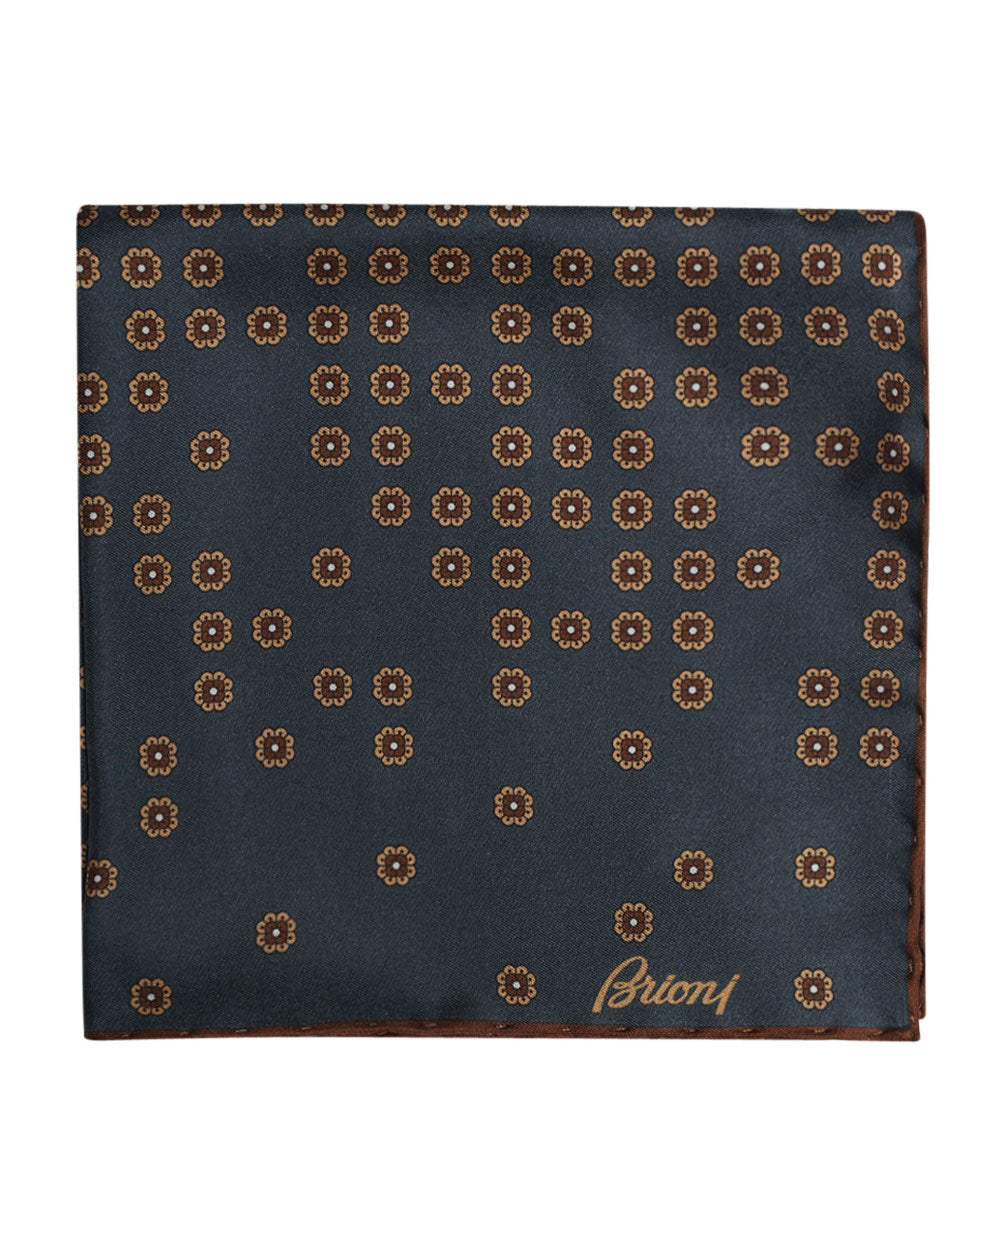 Grey and Brown Medallion Silk Pocket Square